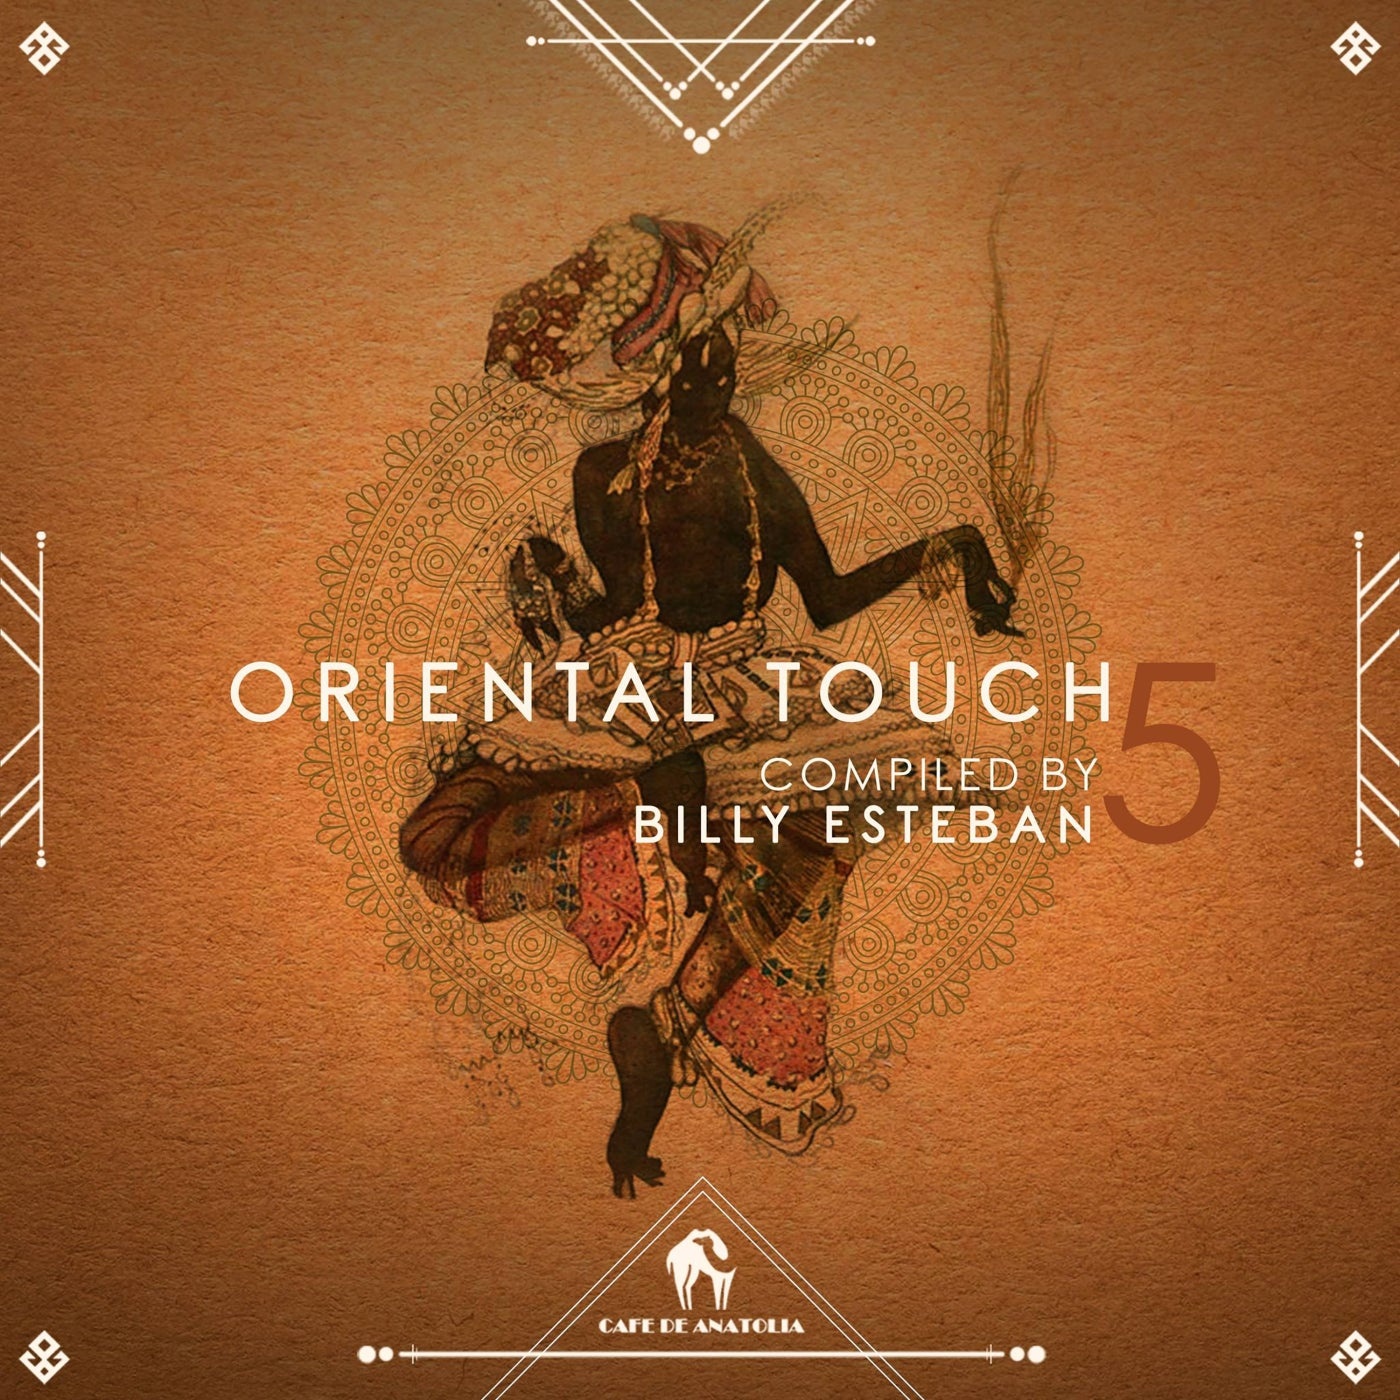 VA - Oriental Touch 5 (Compiled by Billy Esteban) [CDA023]